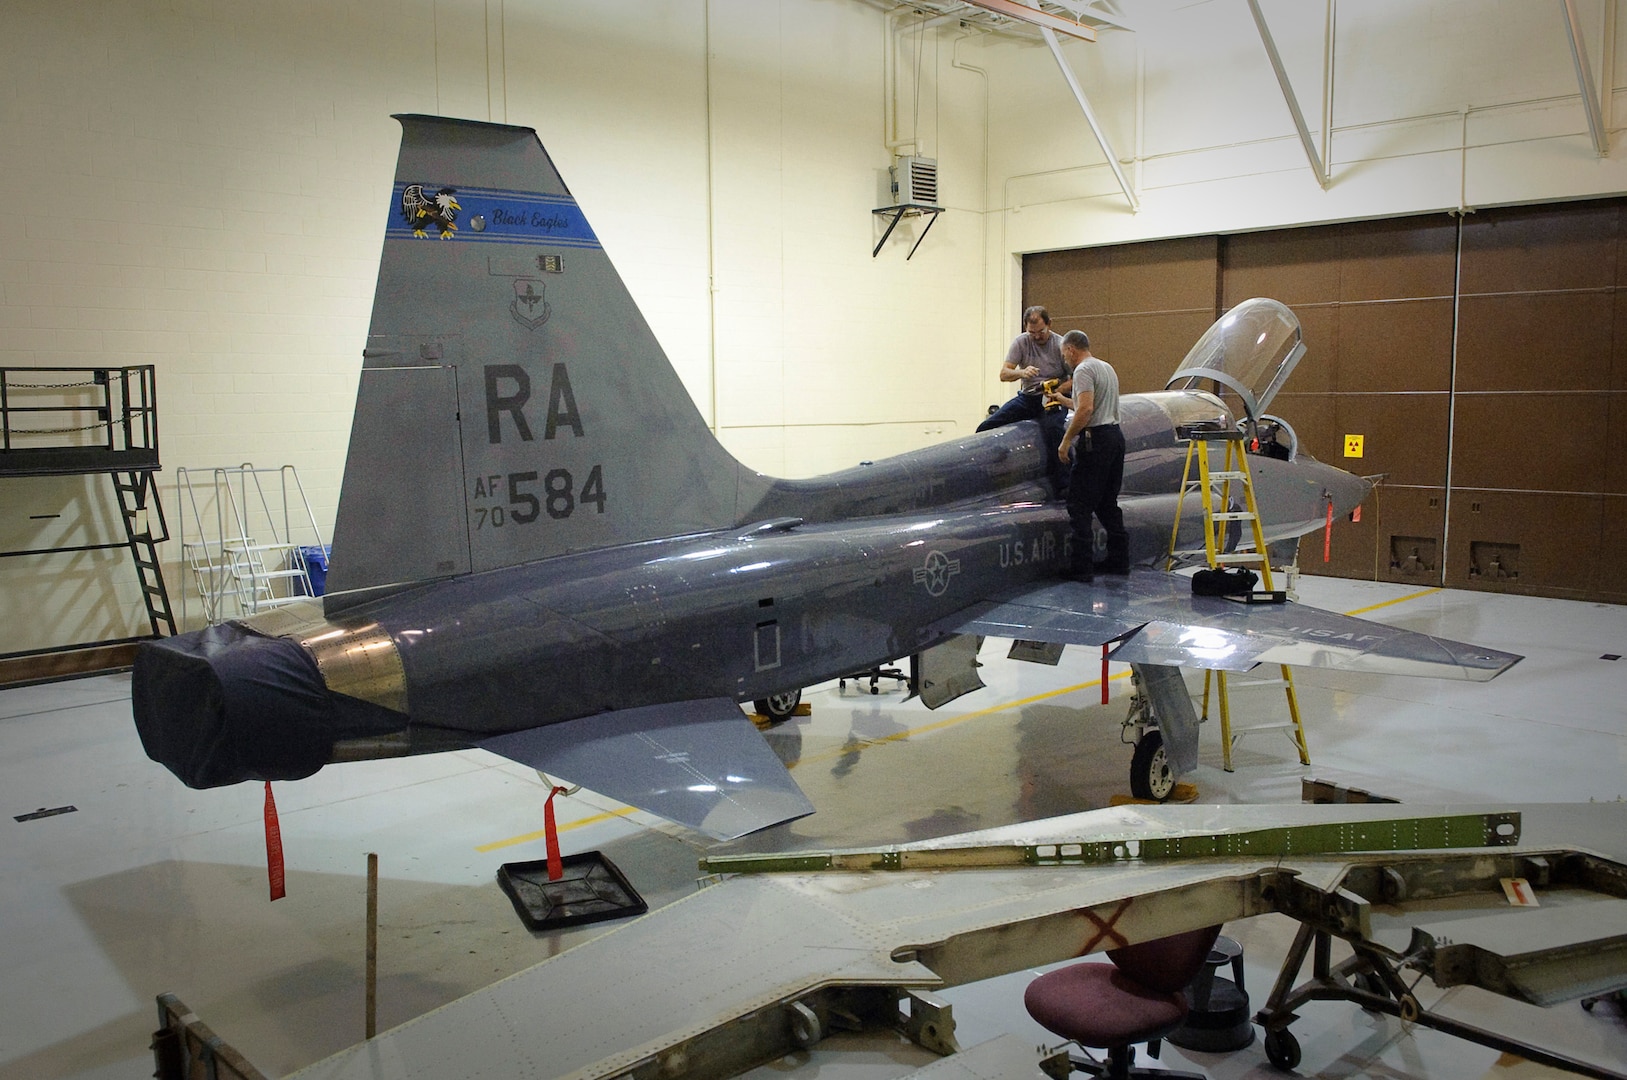 Randolph AFB, TX, 30 September 2010: Members of the 12th Flying Training maintenance directorate replace panels on a T-38 inside the lead lined inspection hangar after a nondestructive x-ray inspection.  (U.S. Air Force photo/Steve Thurow)